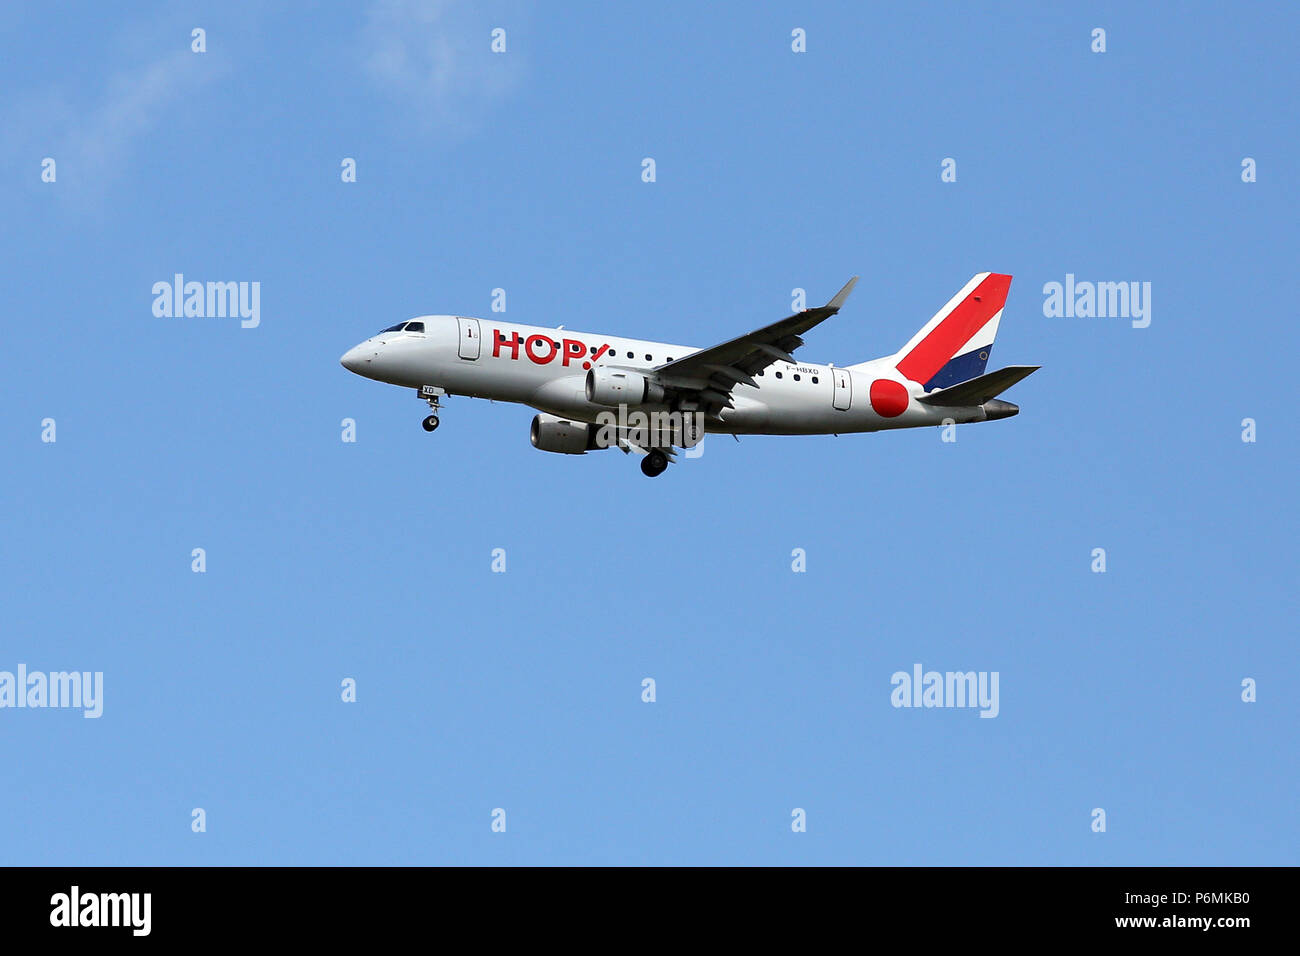 Hannover, Germany - Machine of the airline HOP! in the air Stock Photo